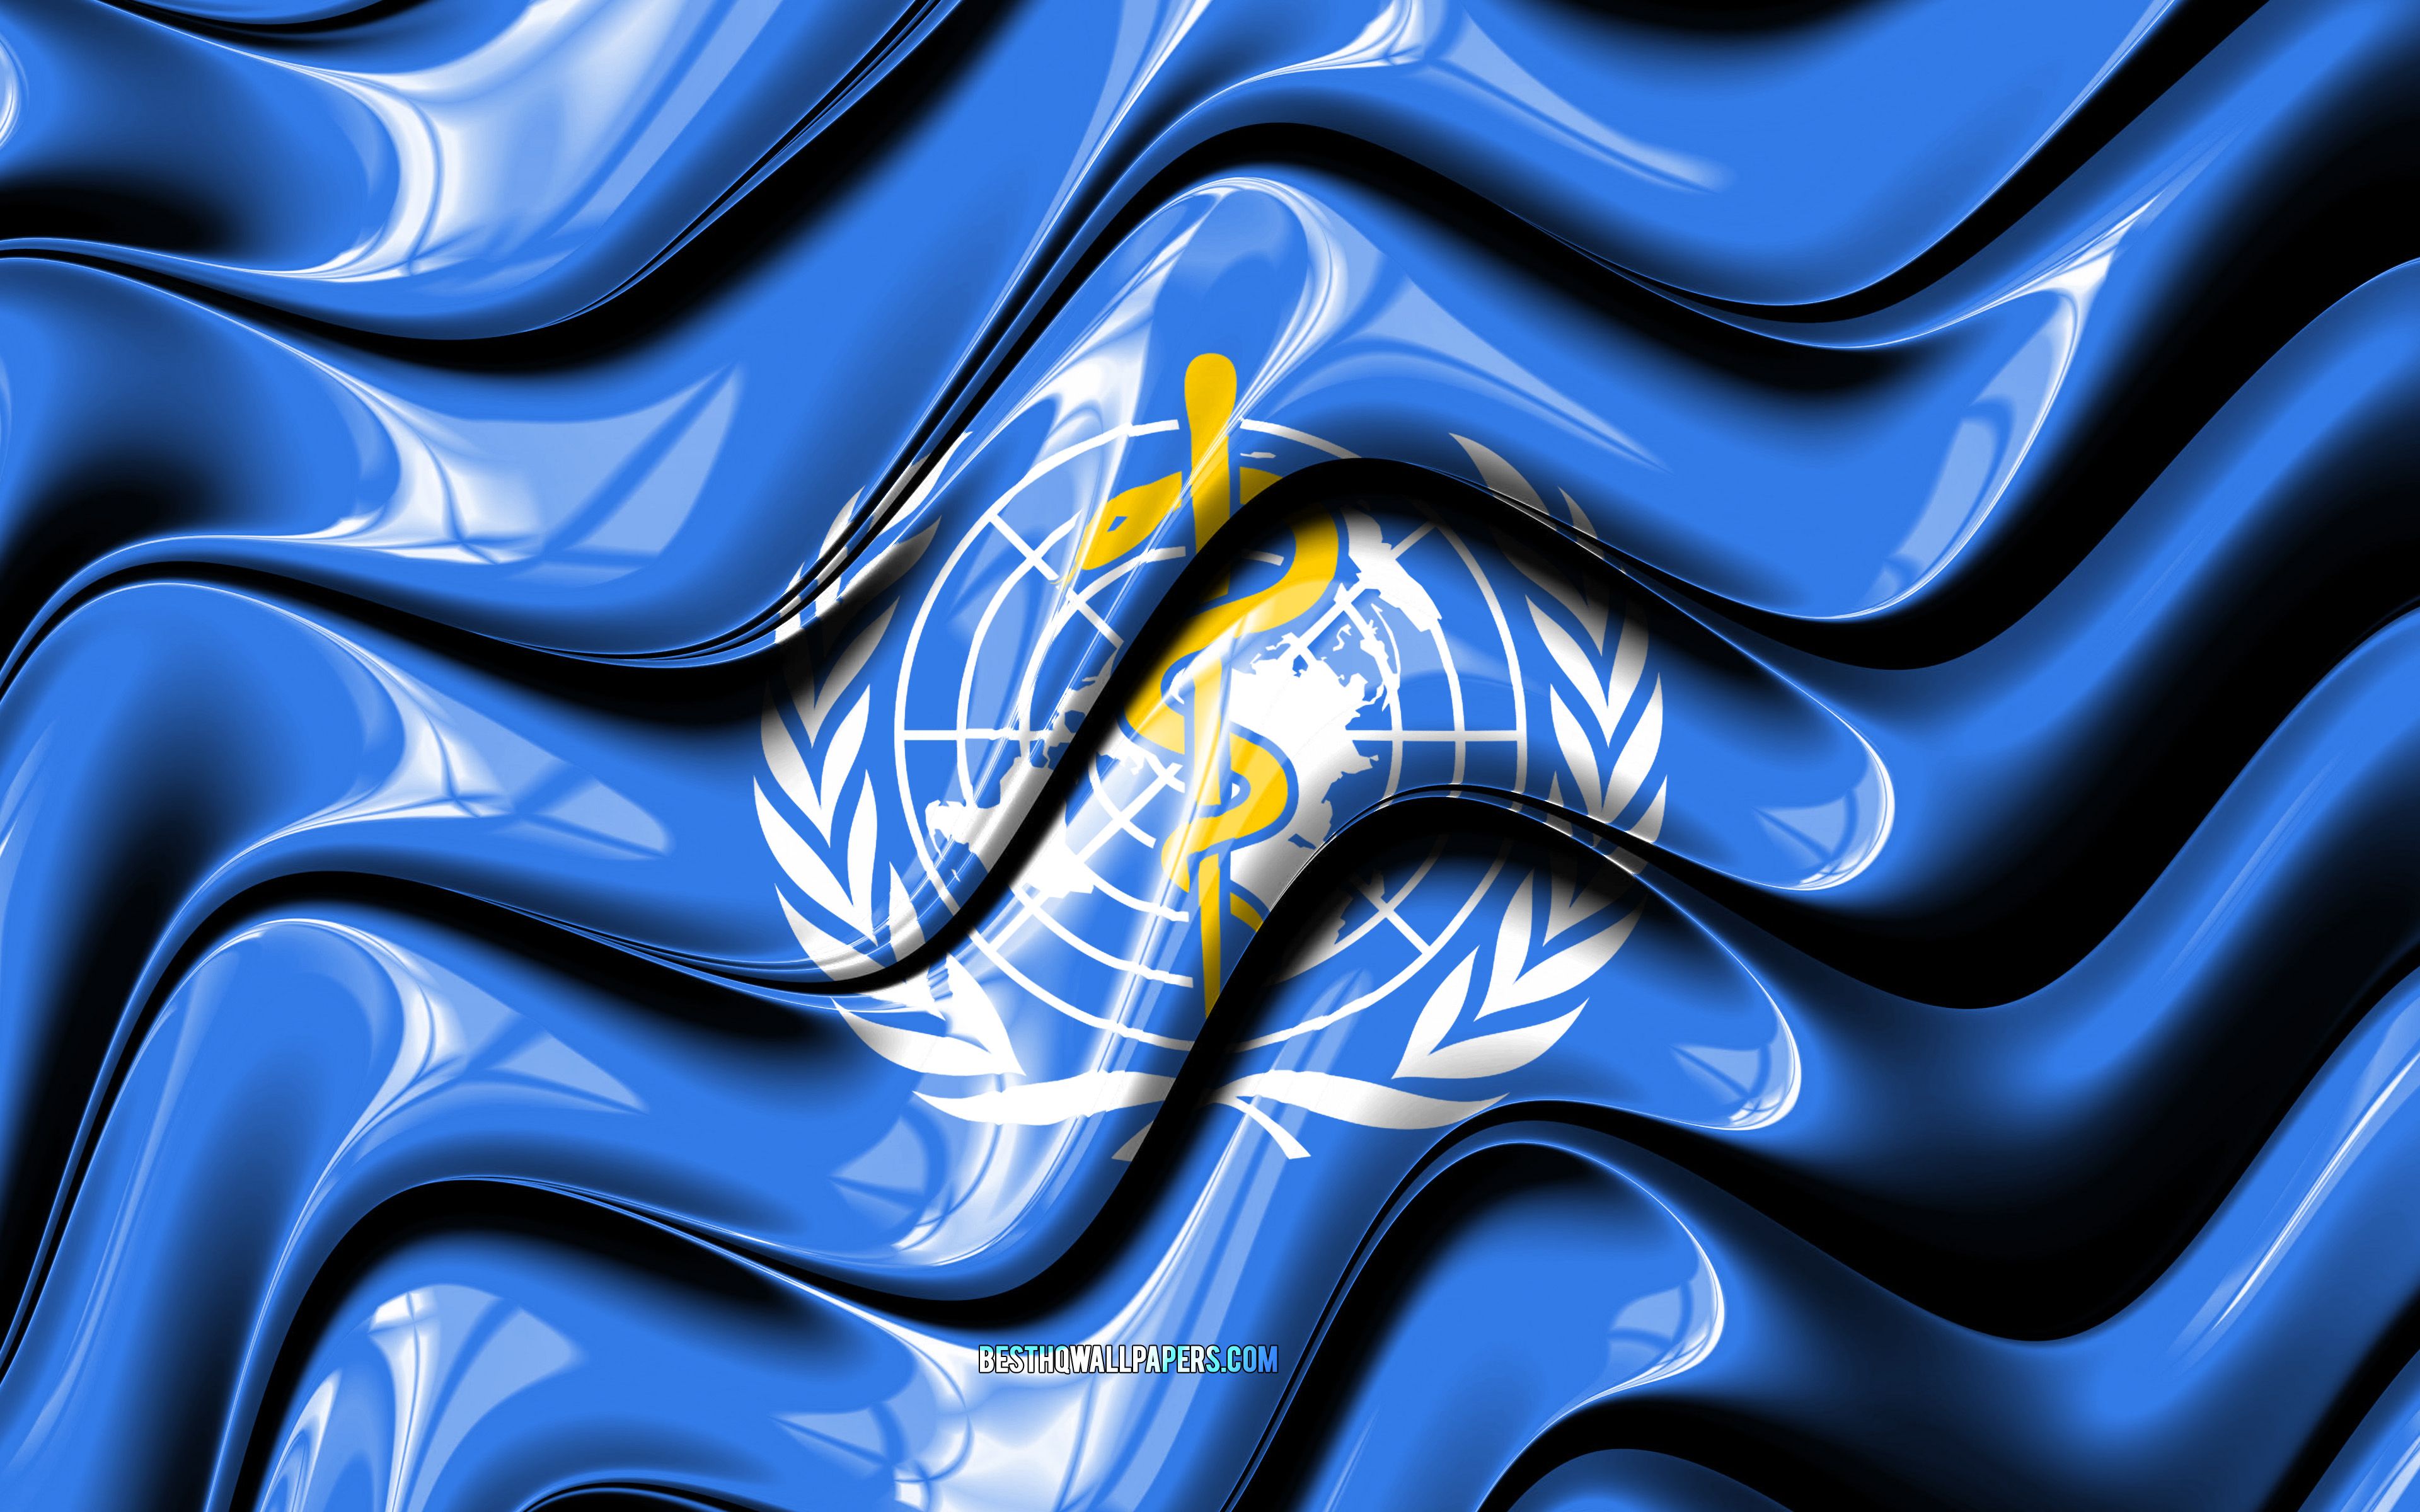 Download wallpaper World Health Organization, 4k, world organizations, Flag of WHO, 3D art, WHO for desktop with resolution 3840x2400. High Quality HD picture wallpaper